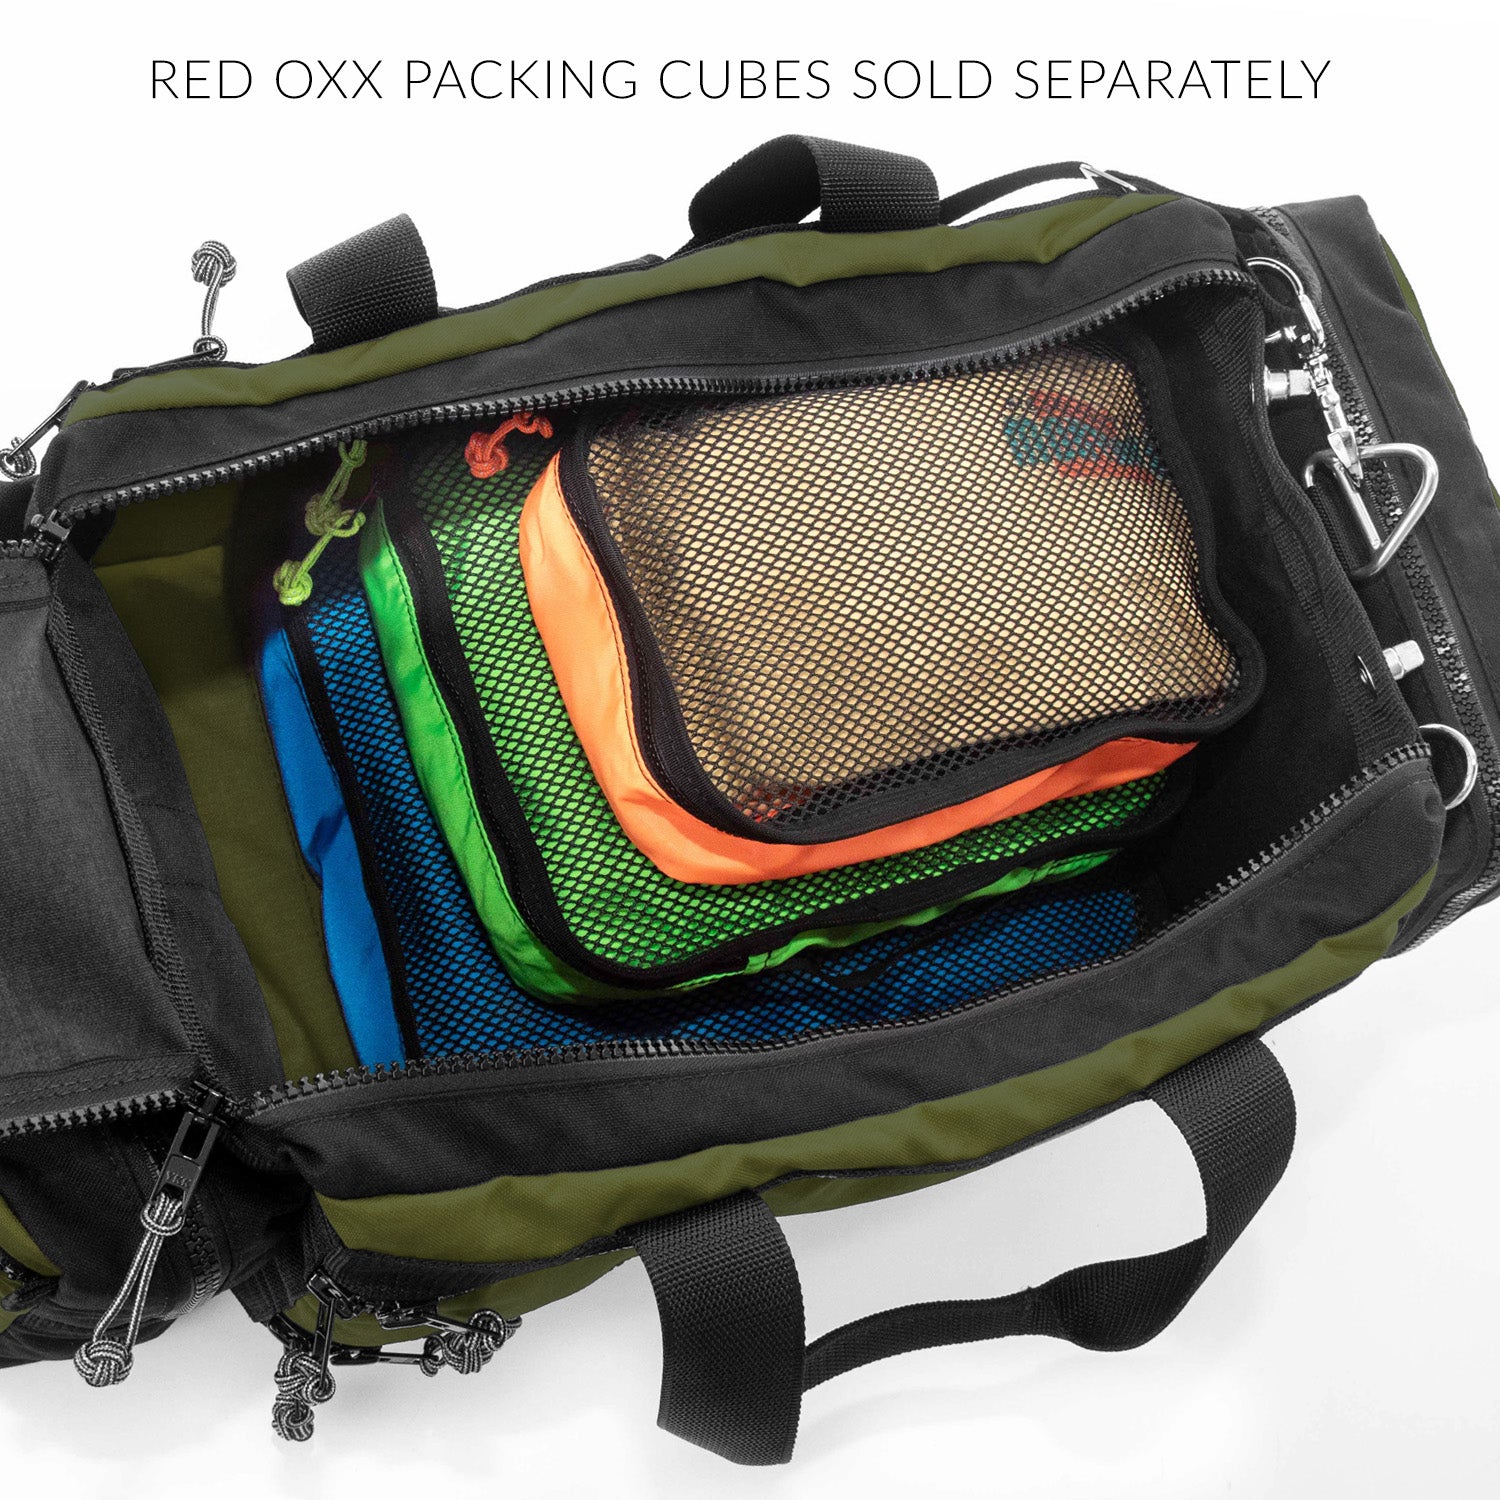 Red Oxx packing cubes sold separately.